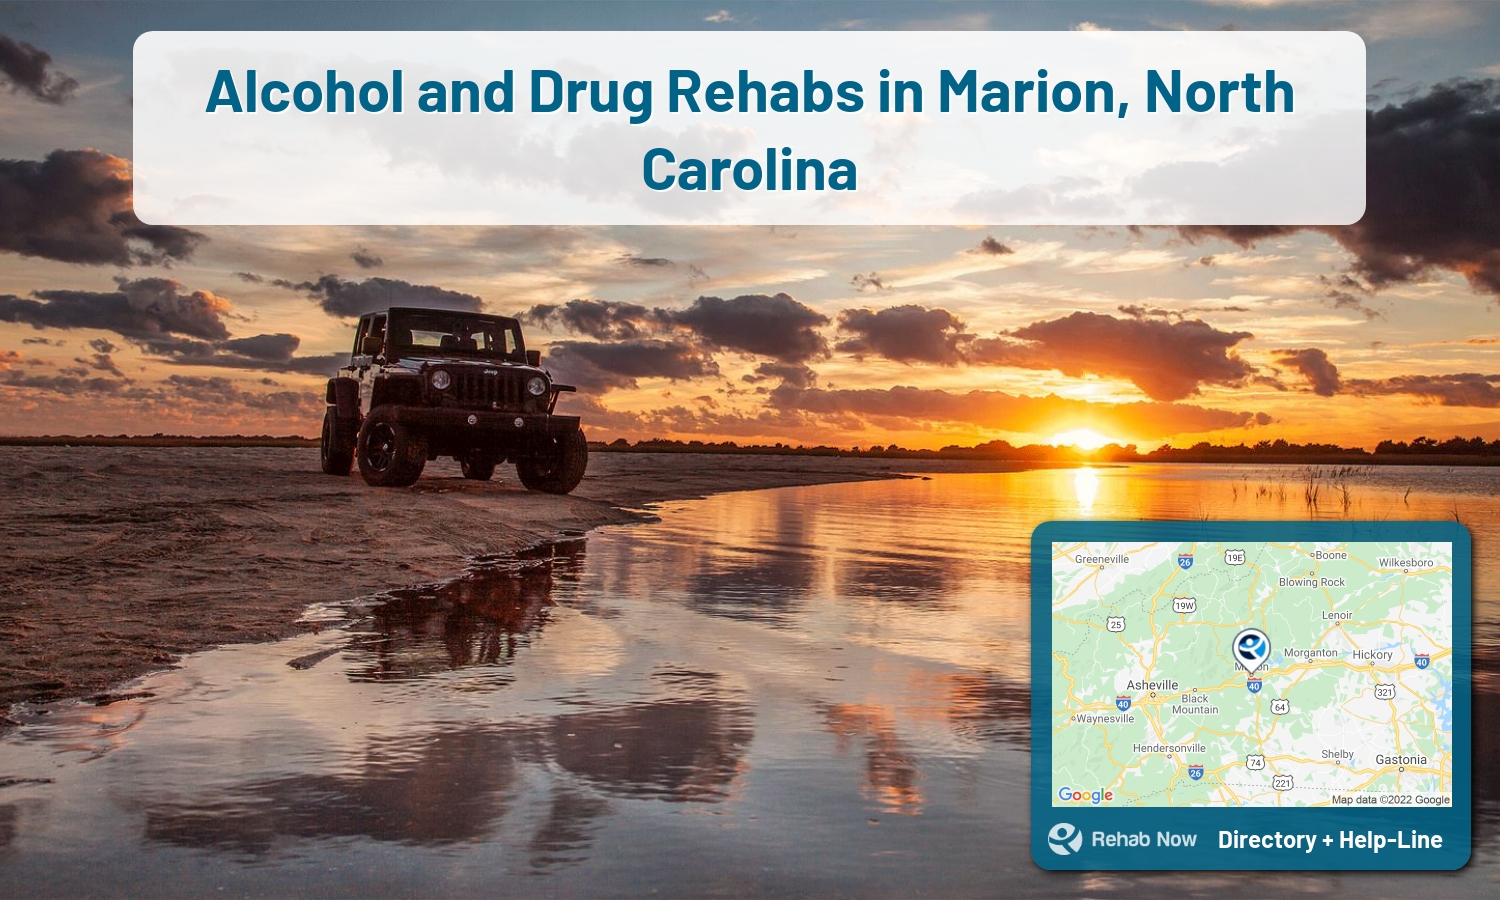 Drug rehab and alcohol treatment services nearby Marion, NC. Need help choosing a treatment program? Call our free hotline!